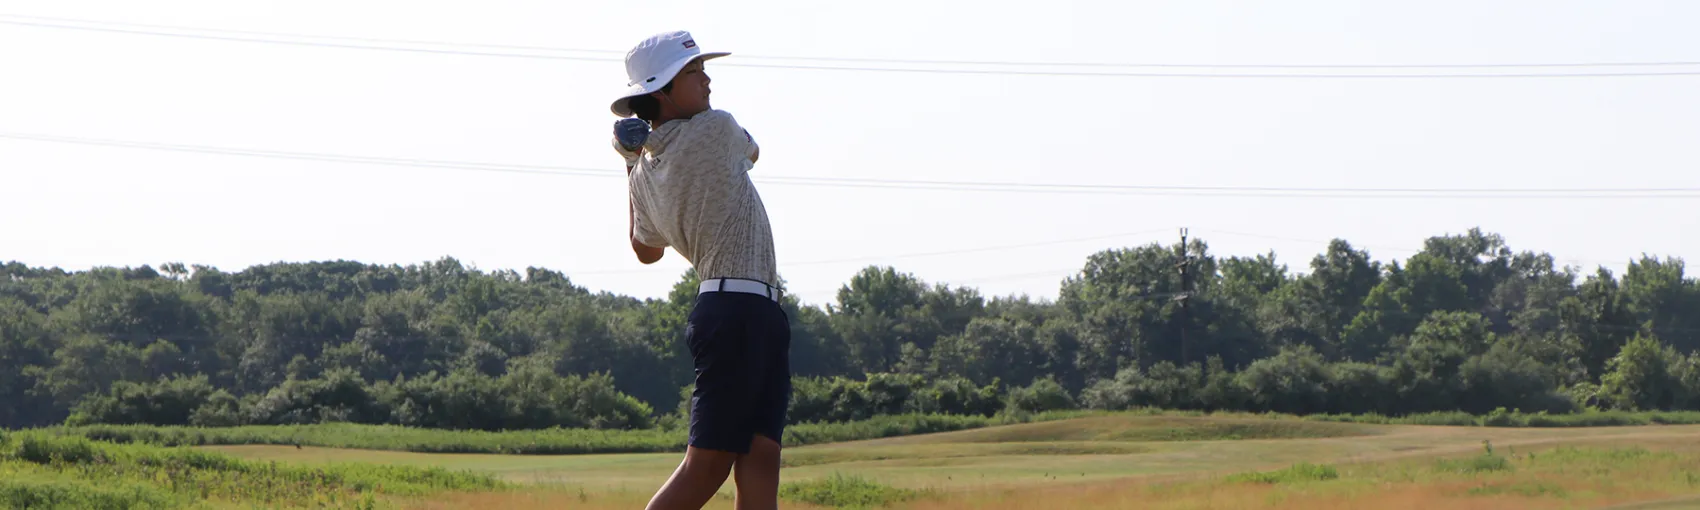 Lepone, Feng Pace Boys Championship; Match Play Set for Junior Girls’ Championship